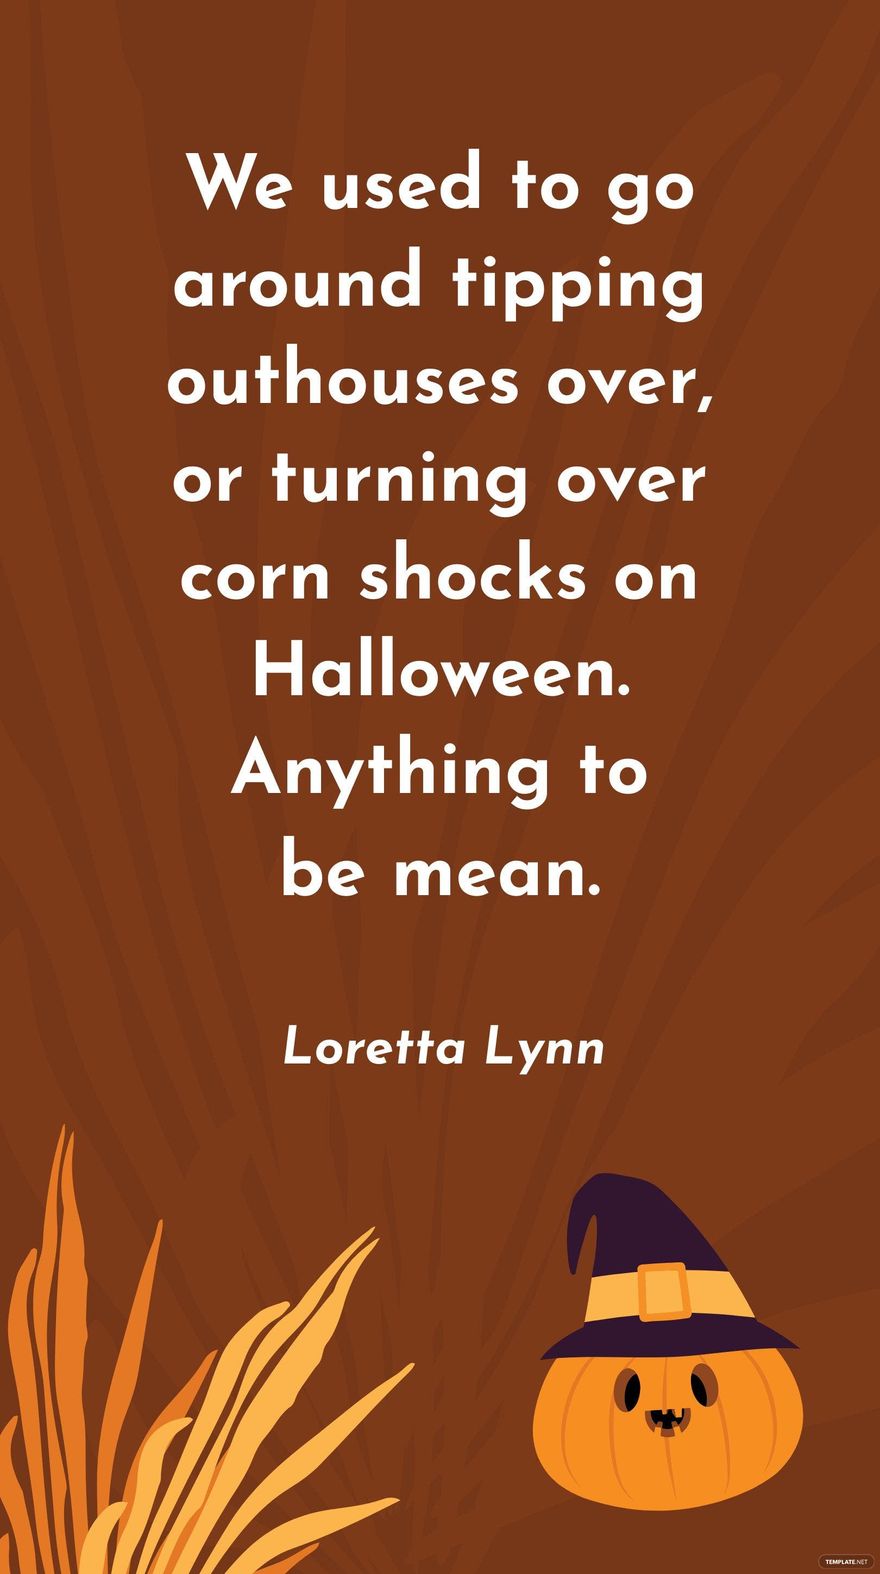 Loretta Lynn - We used to go around tipping outhouses over, or turning over corn shocks on Halloween. Anything to be mean.